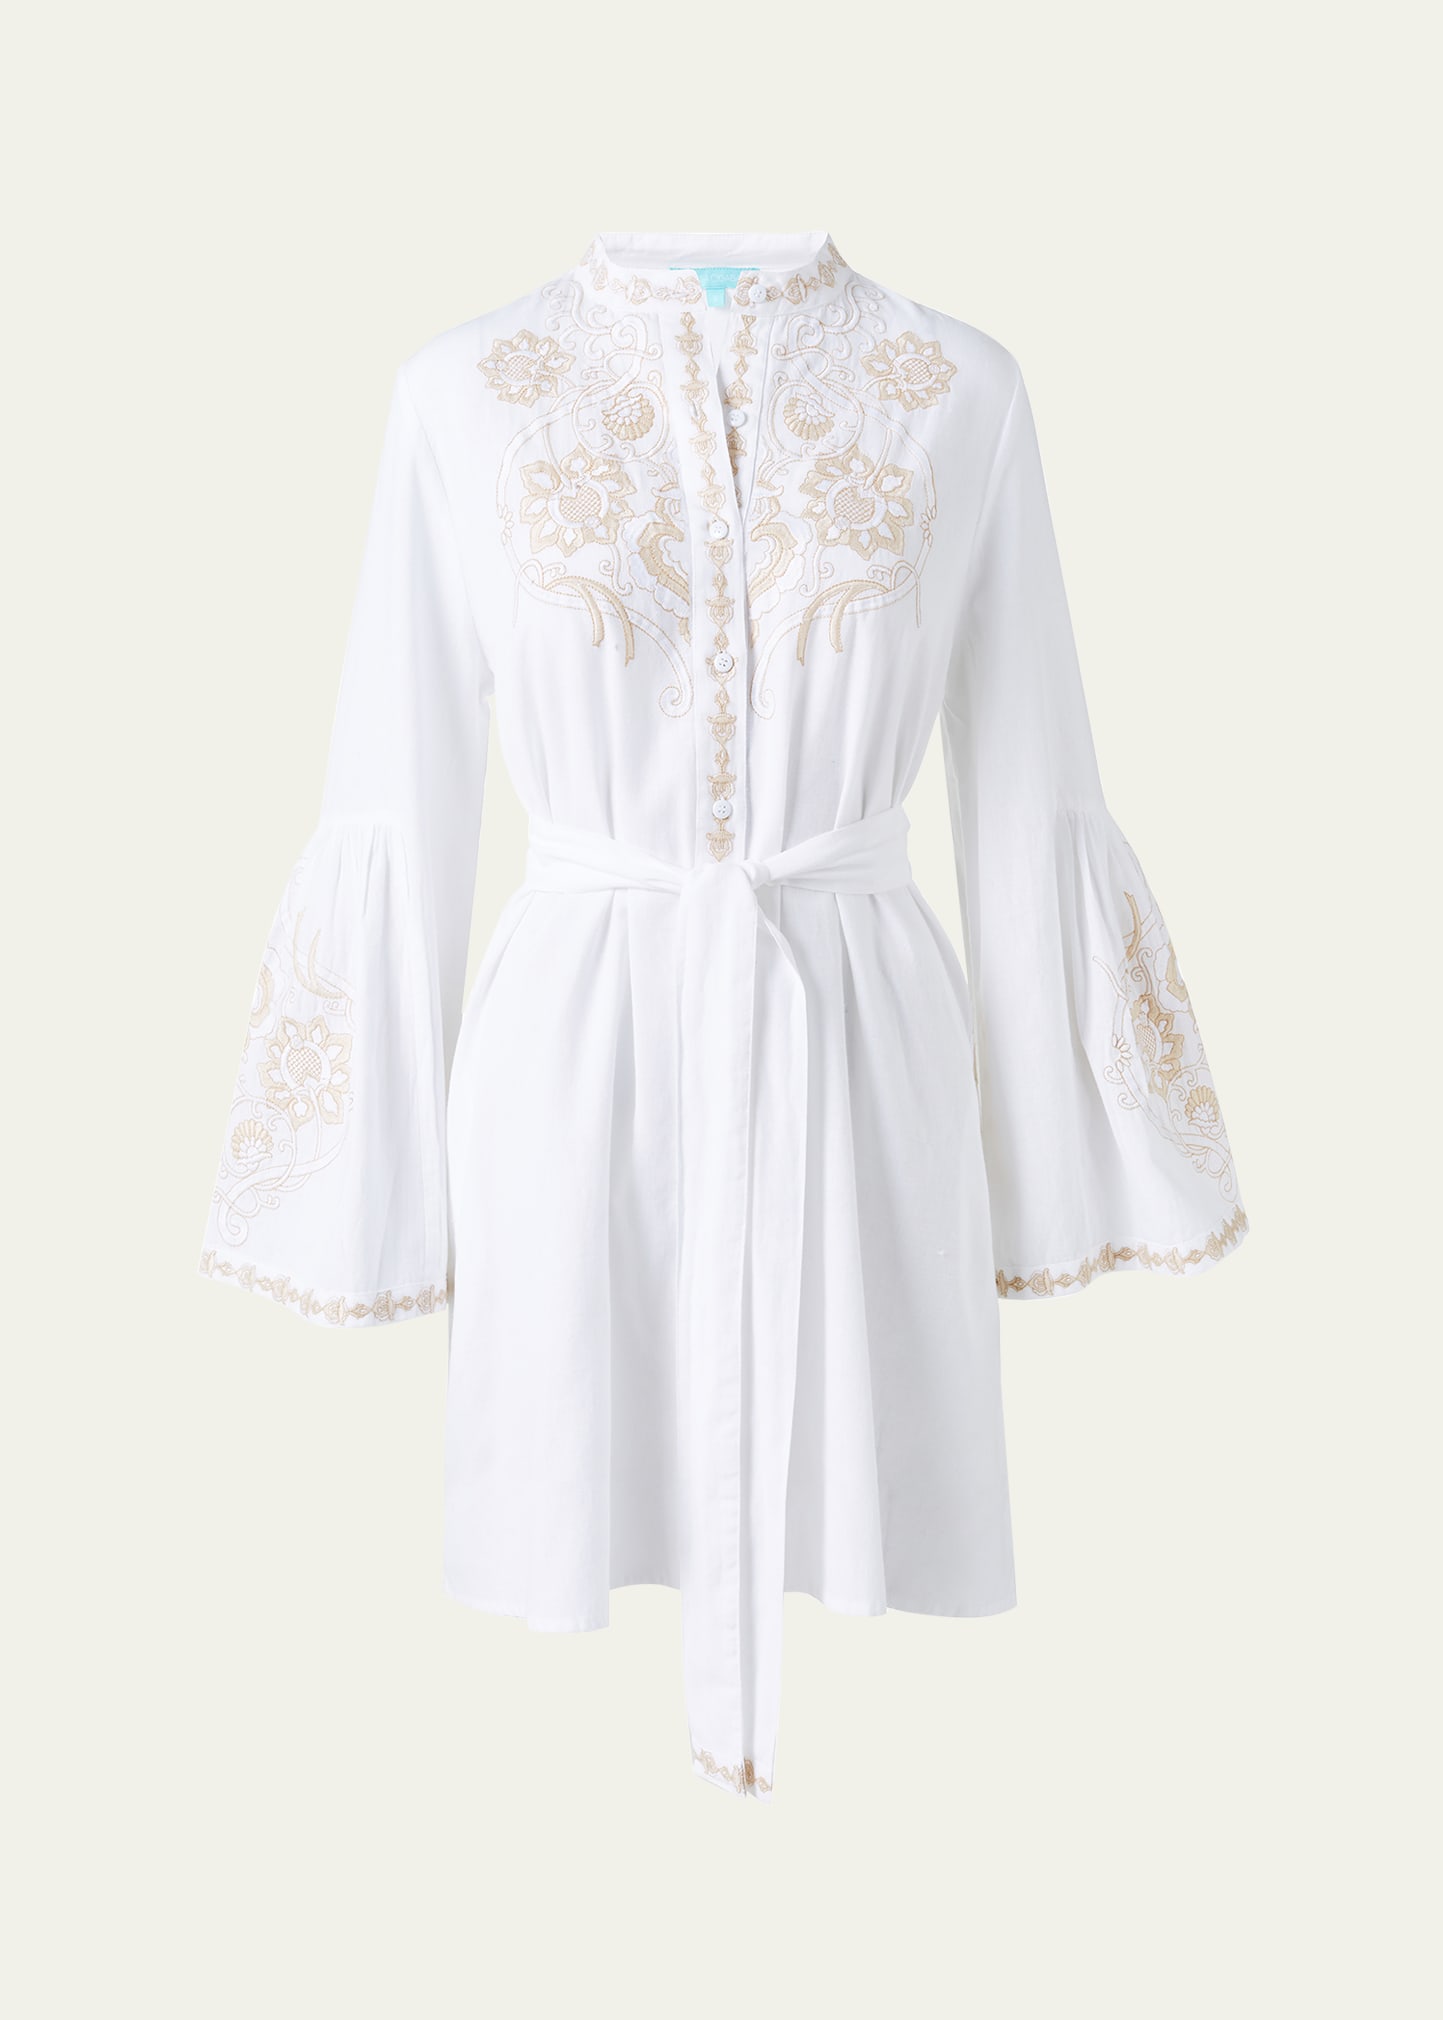 Melissa Odabash Everly Embroidered Shirtdress In White/tan